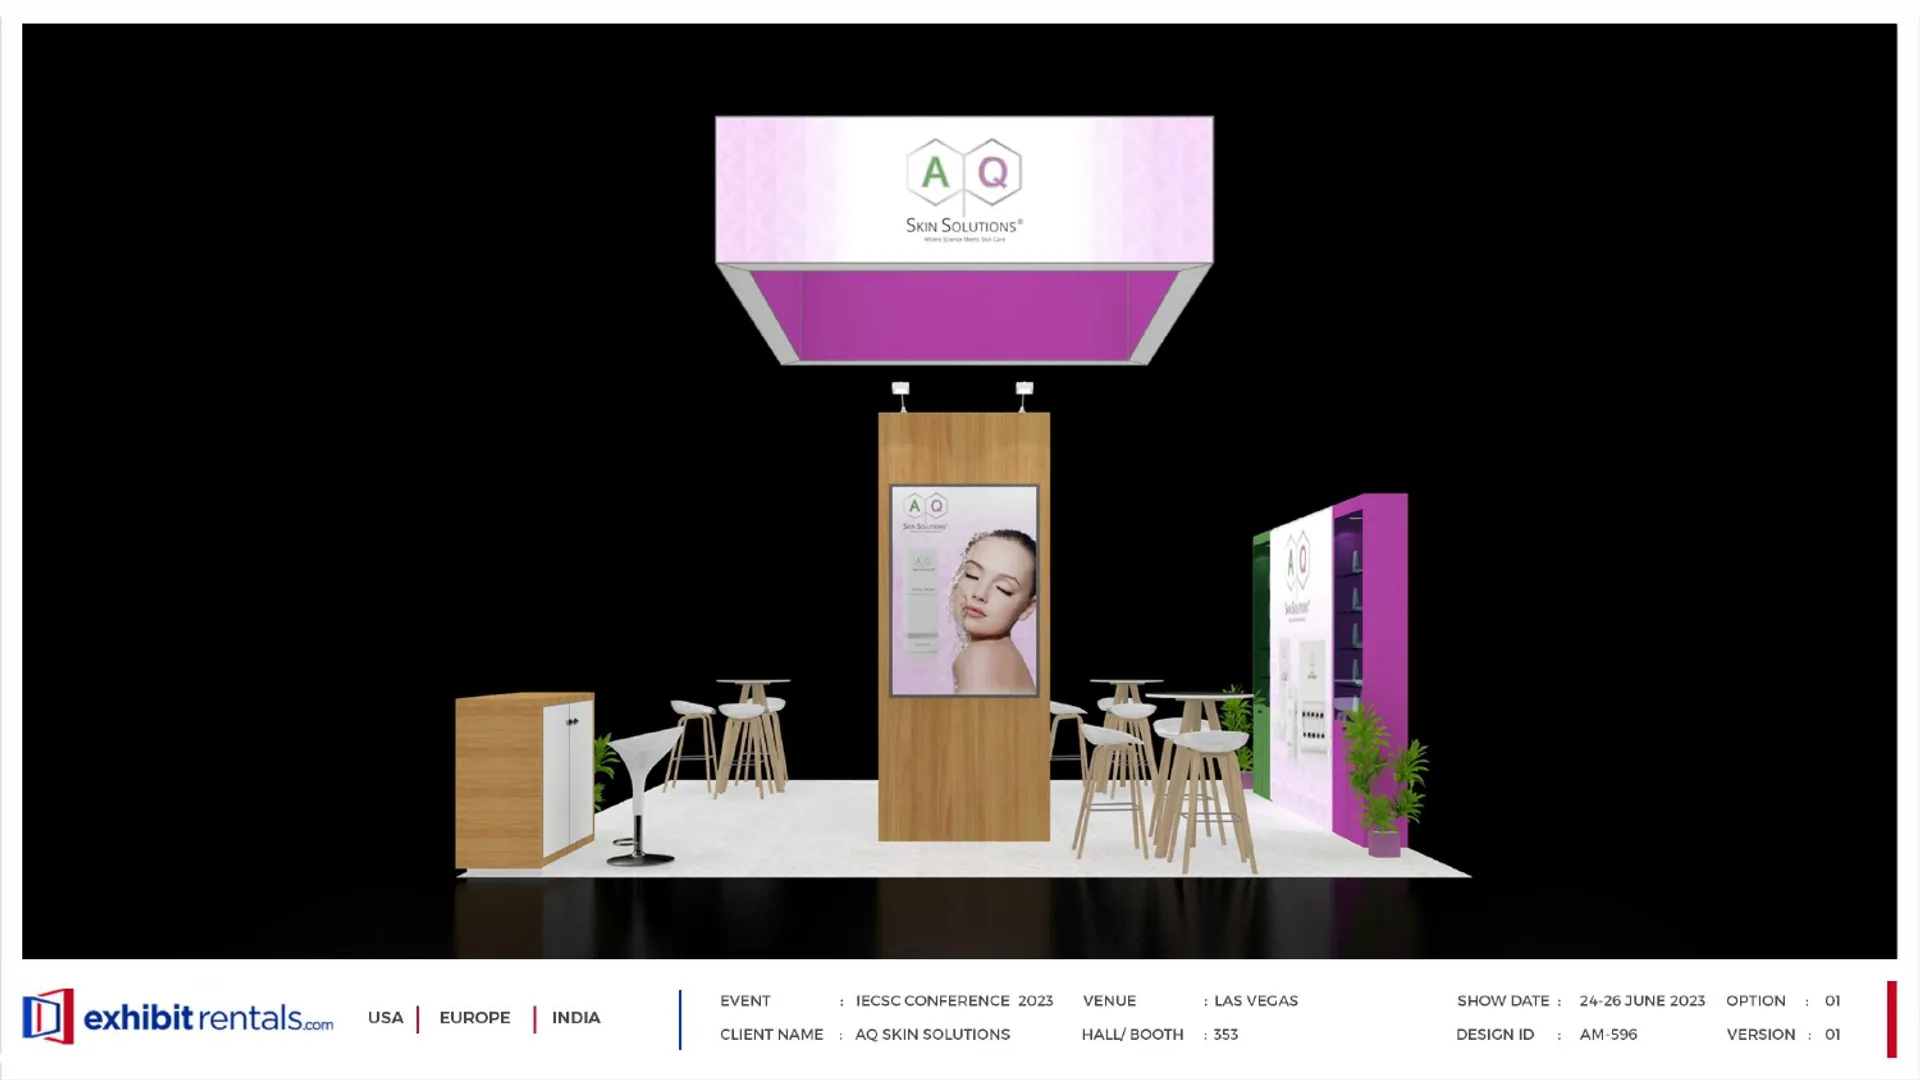 booth-design-projects/Exhibit-Rentals/2024-04-18-20x20-ISLAND-Project-85/1.1_AQ Skin Solutions_IECSC Conference_ER design proposal -20_page-0001-tb4tk8.jpg